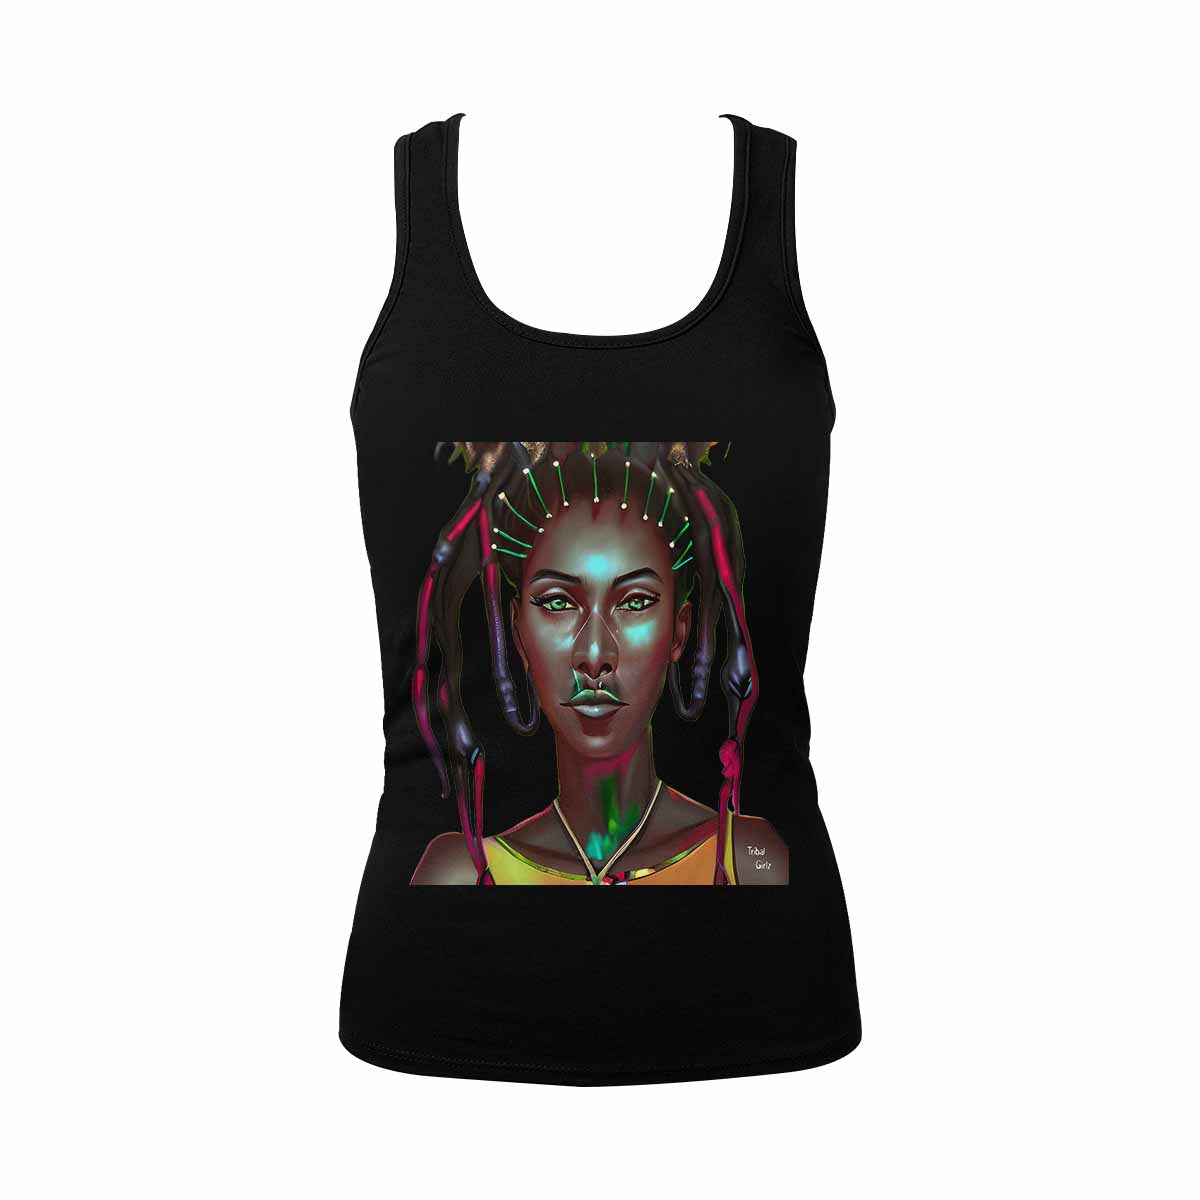 Dreads & Braids, BLACK tank top, cotton, african tribal, outline MCL, Fulangiara 31